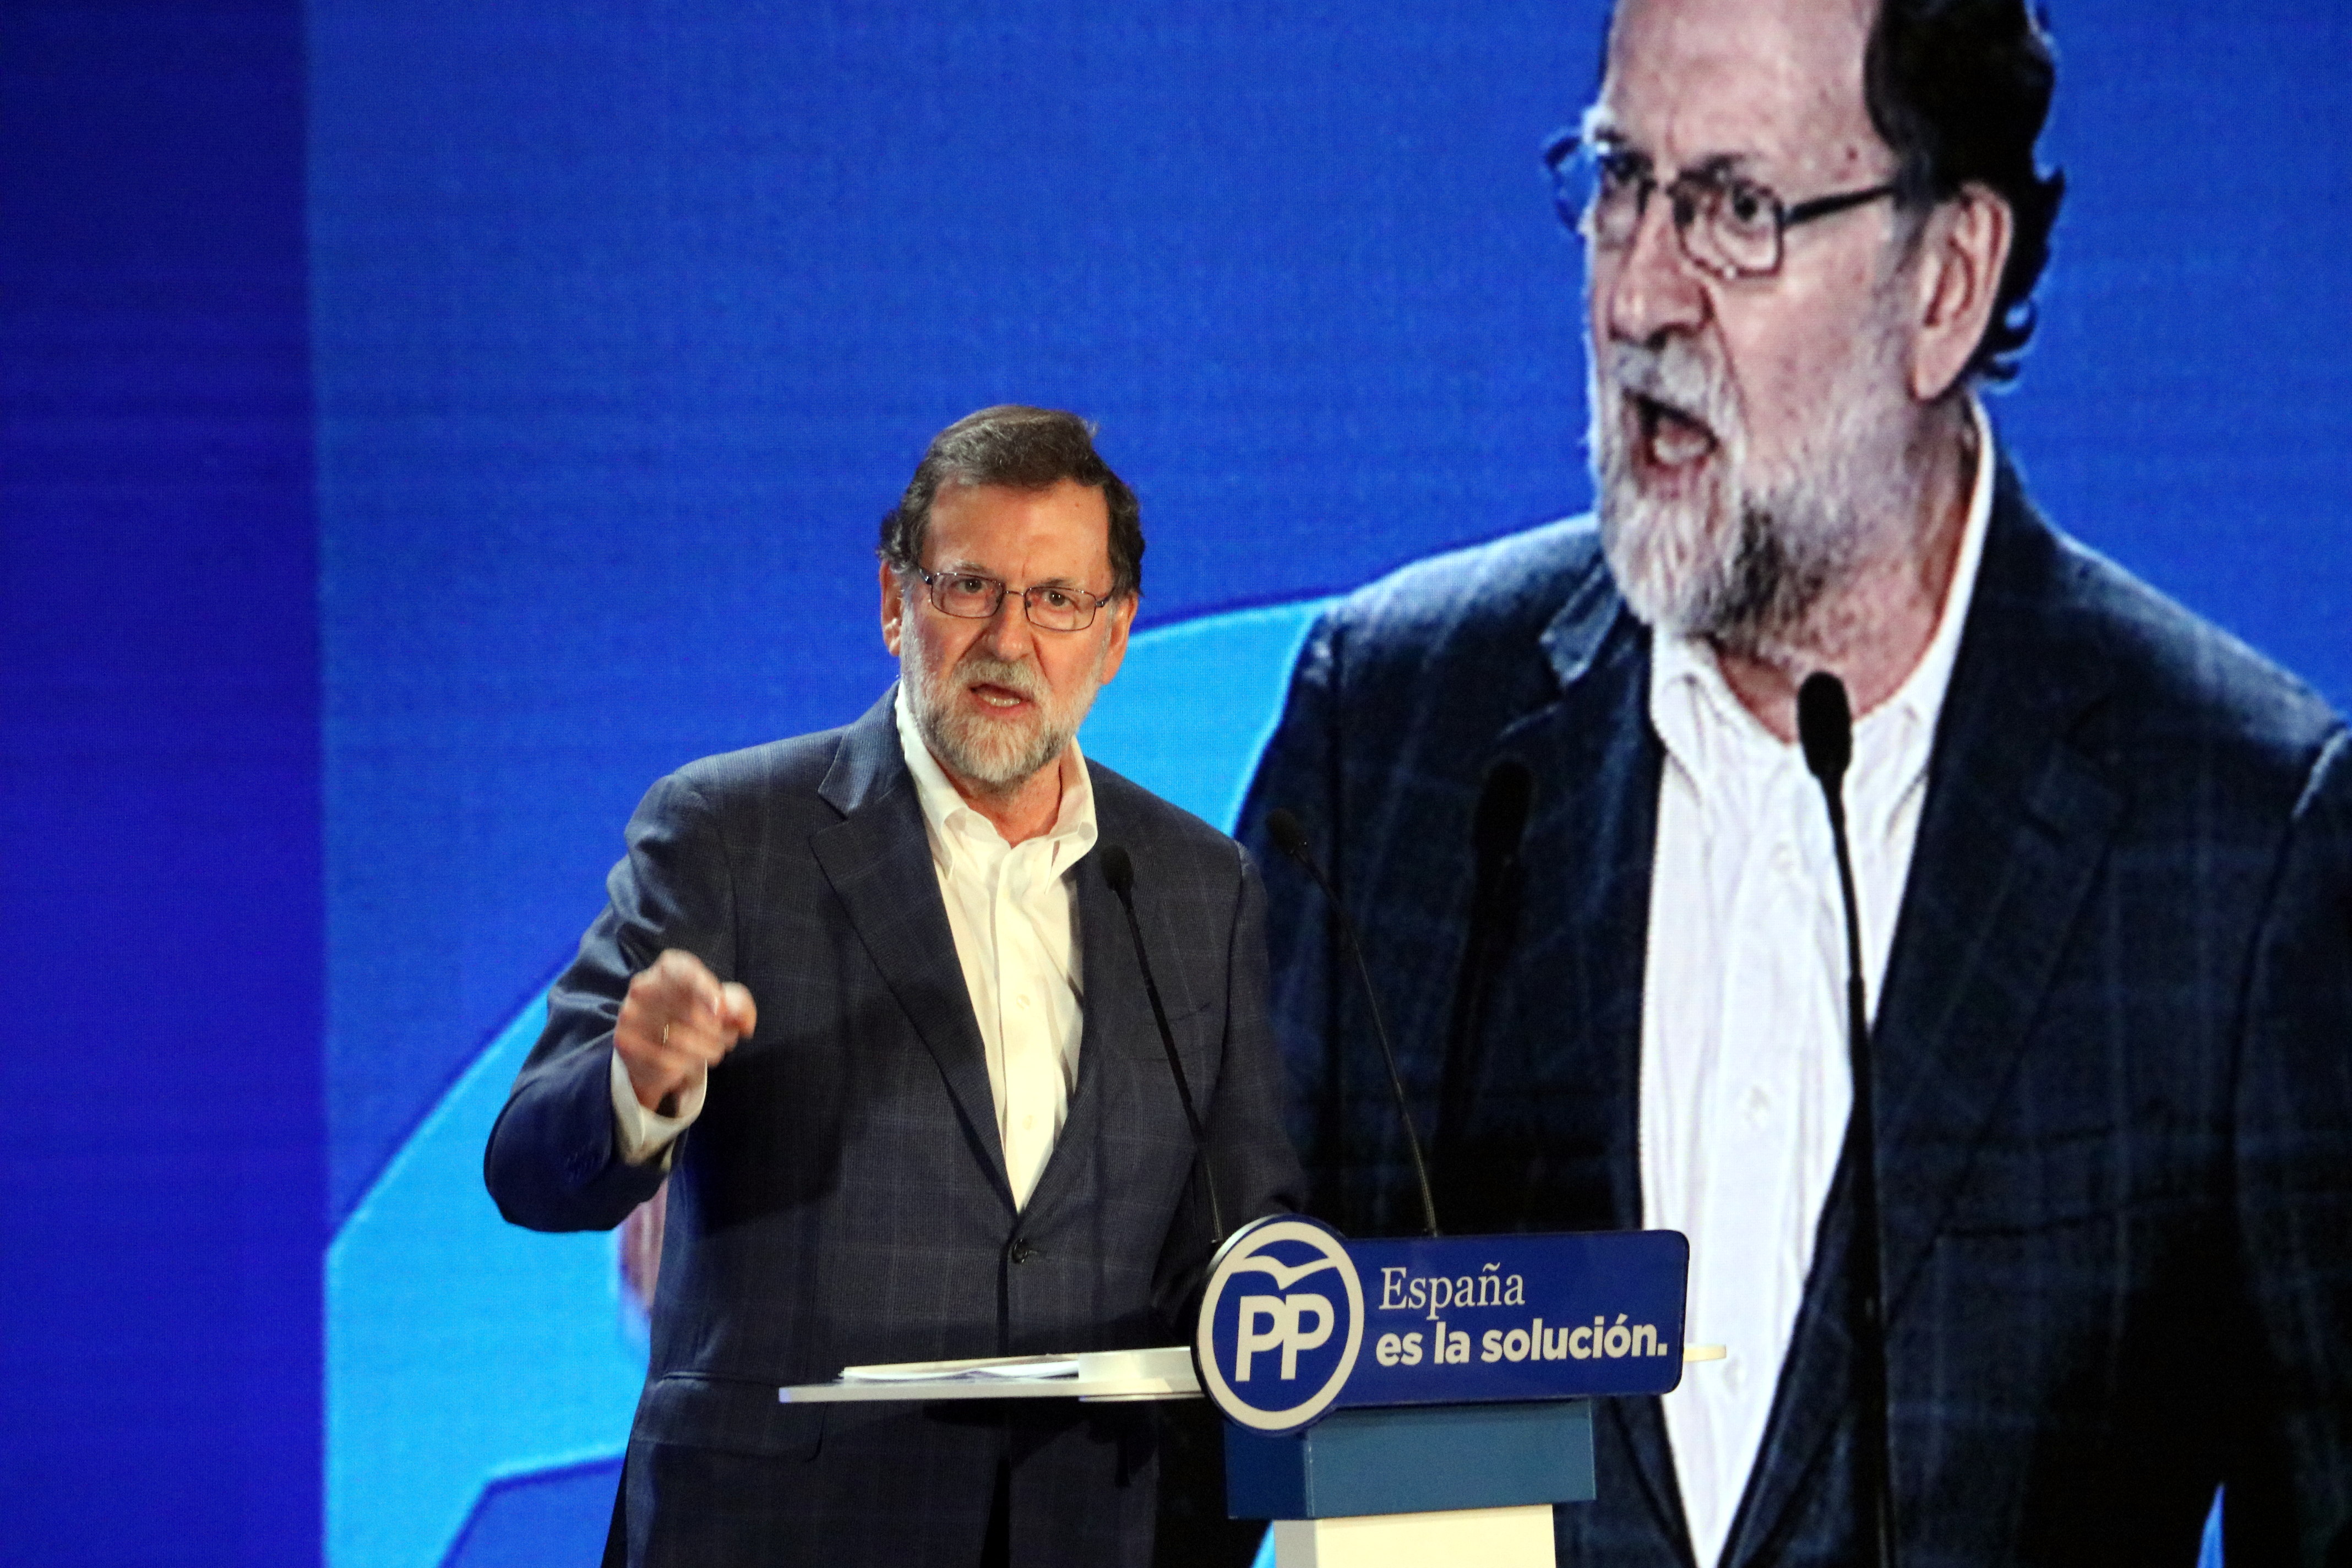 Mariano Rajoy speaking in Catalonia (by ACN)